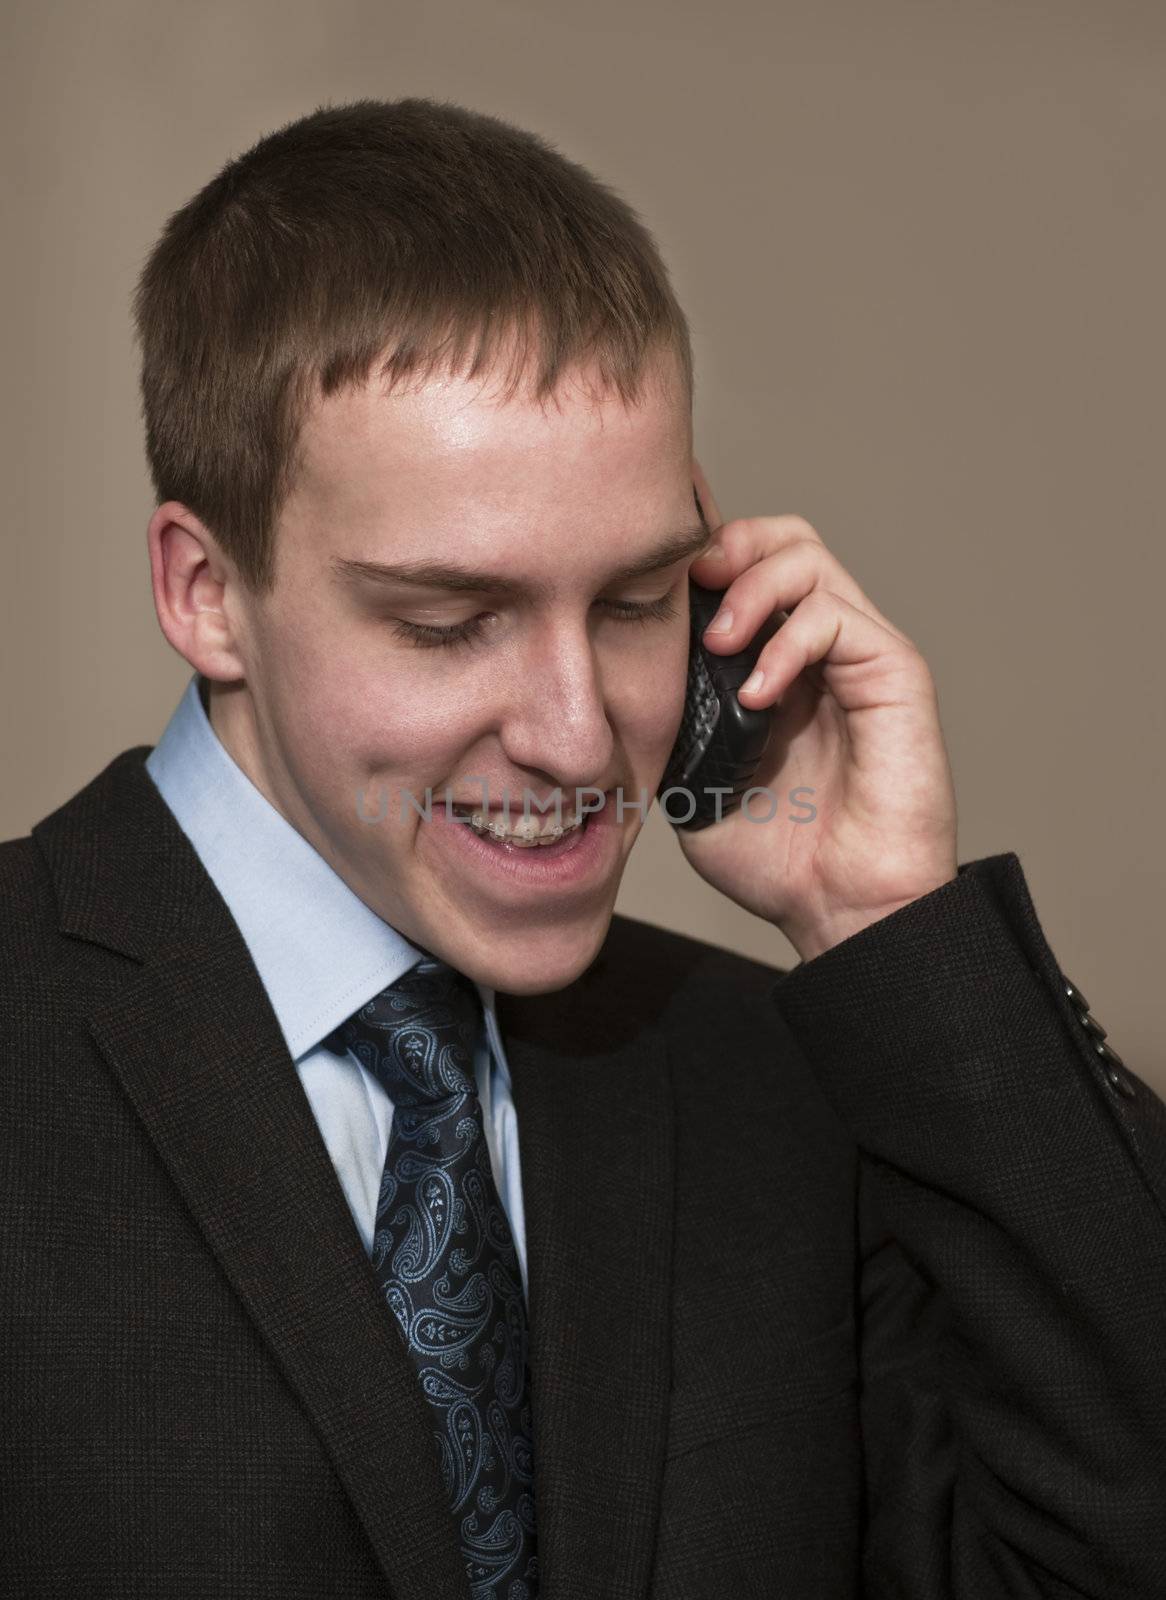 Young business man with braces speaking on cellphone.